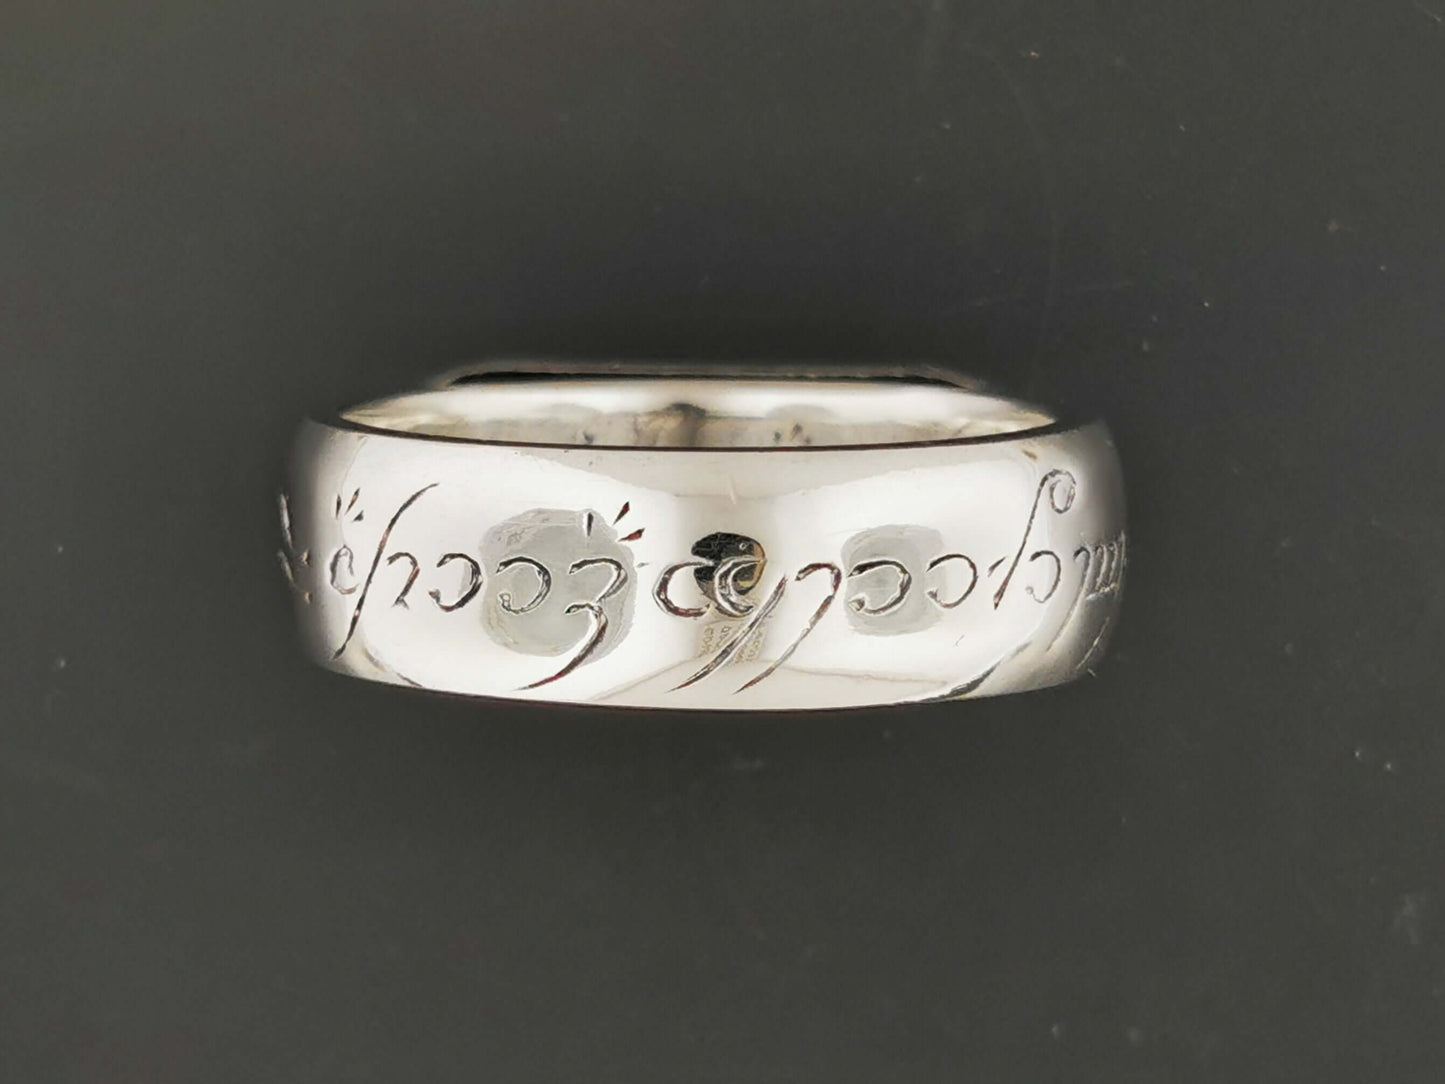 Elvish Ring in Sterling Silver or Antique Bronze, Sterling Silver Cosplay Ring, Sterling Silver Geek Ring, Silver Movie Ring, Silver Geek Ring, Precious Metal Geekery, Precious Metal Geek Jewelry, Geek Gift For Her, Geek Gift For Him, Bronze Geek Ring, Silver Elvish Ring, Bronze Elvish Ring, Silver Cosplay Ring, Bronze Cosplay Ring, Elvish Wedding Band, Elvish Wedding Ring, Precious Metal Cosplay Jewelry